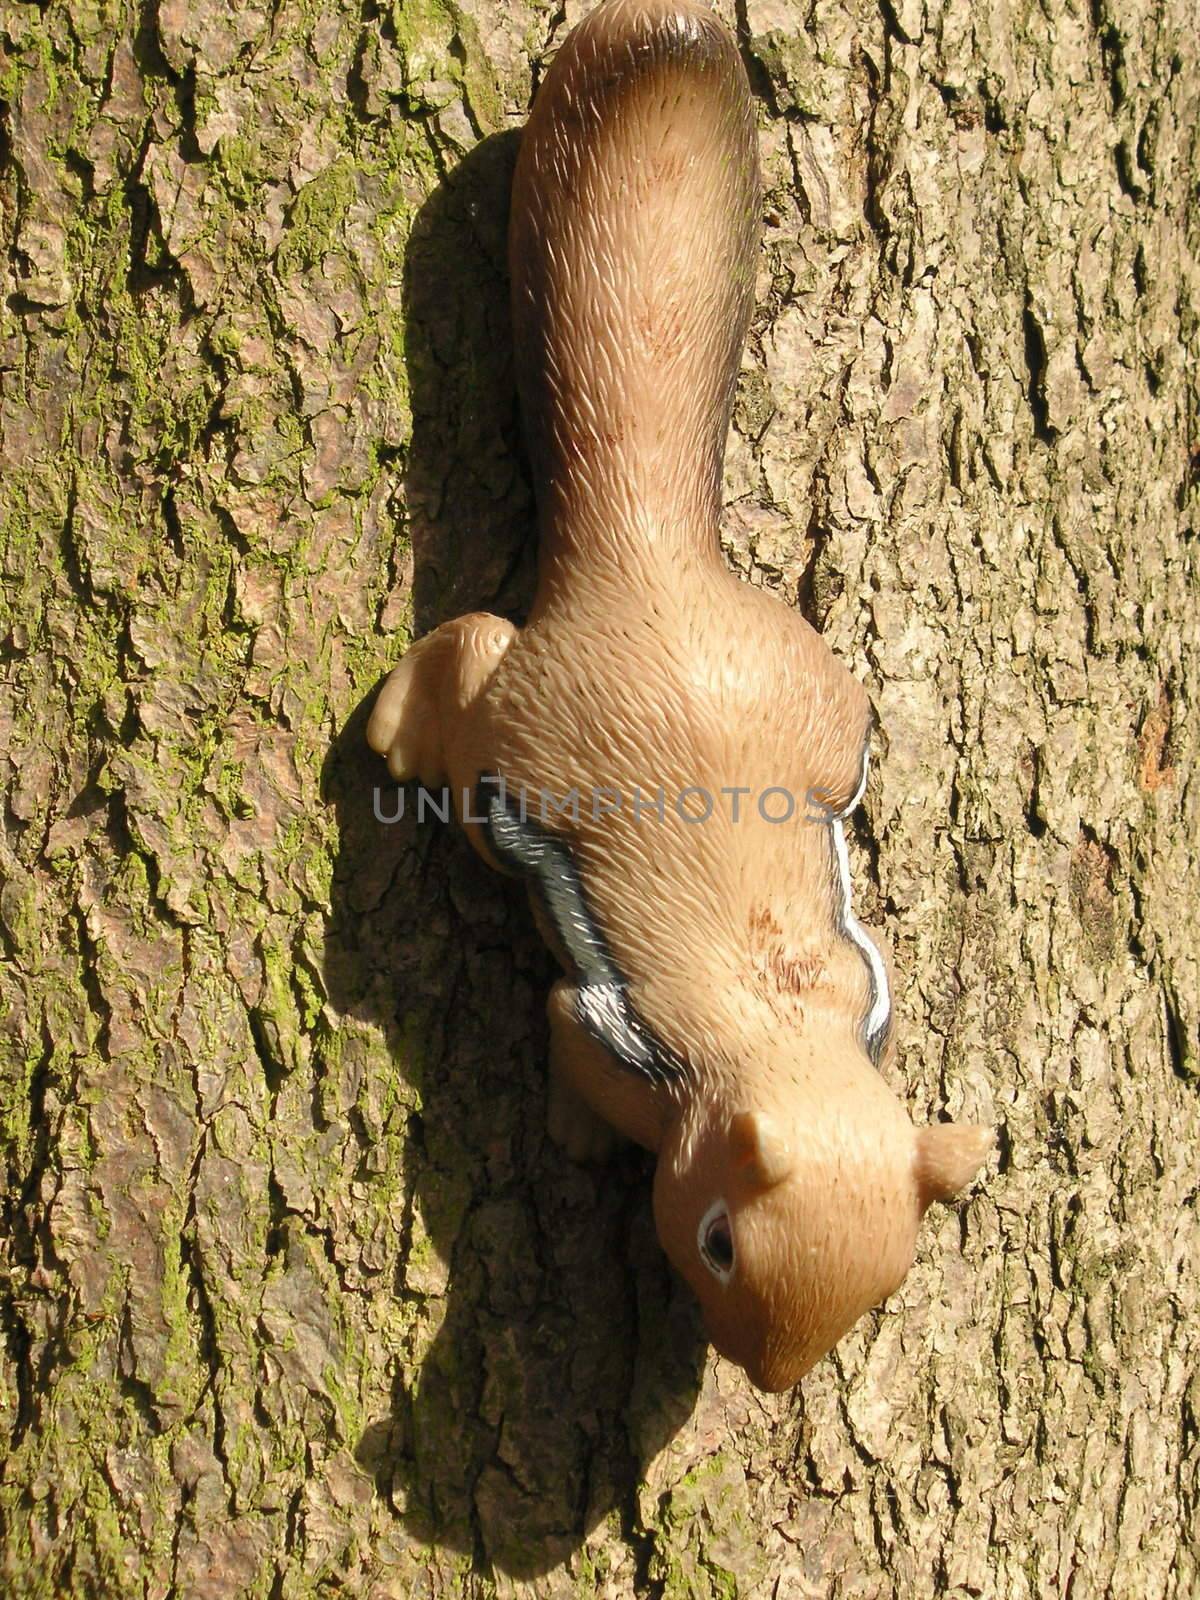 toy squirrel ornament set as if climbing on a tree